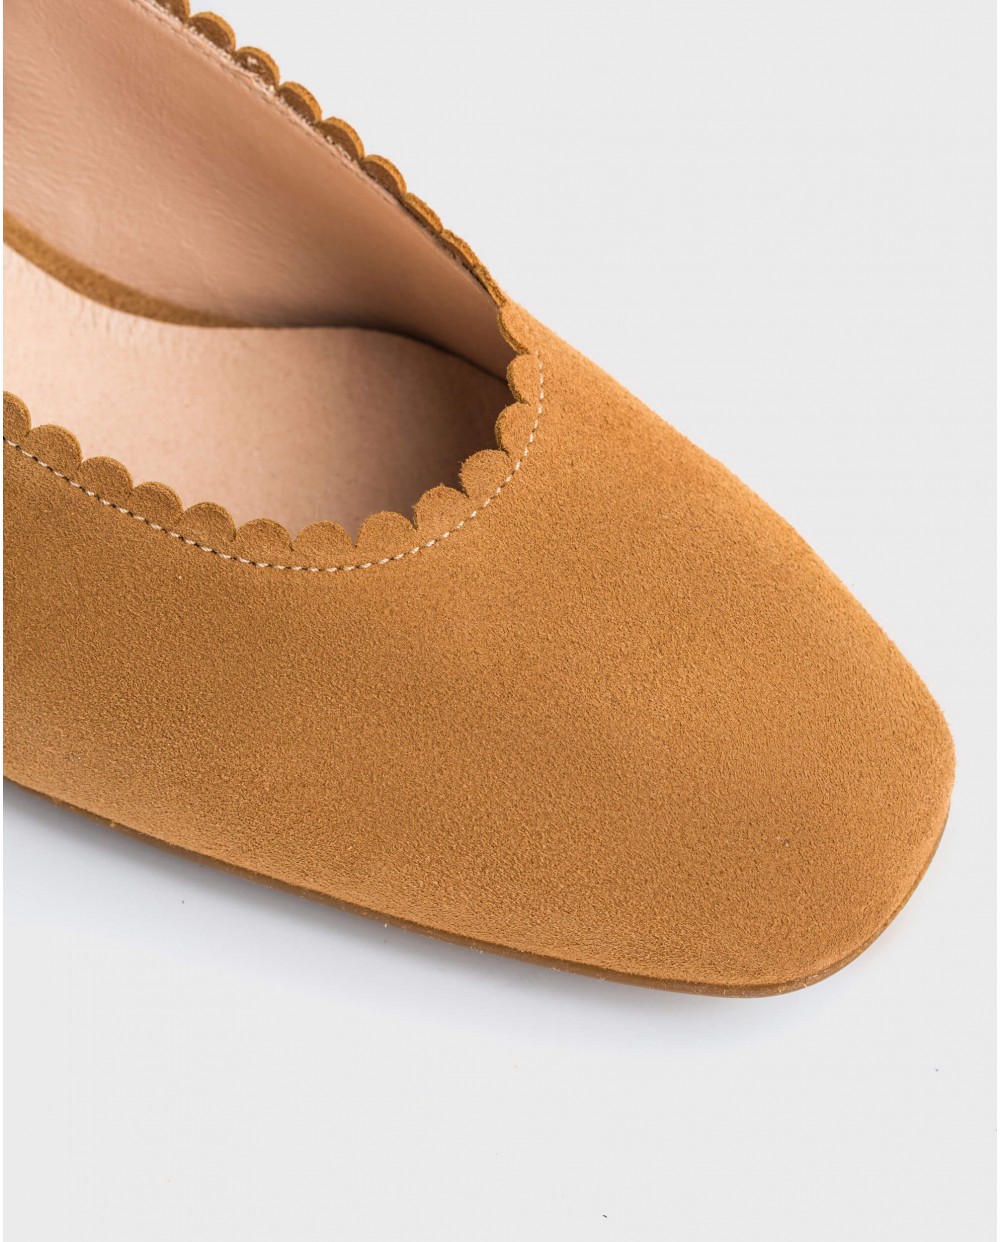 Wonders-Outlet-shoe with a semi-circle cut detail